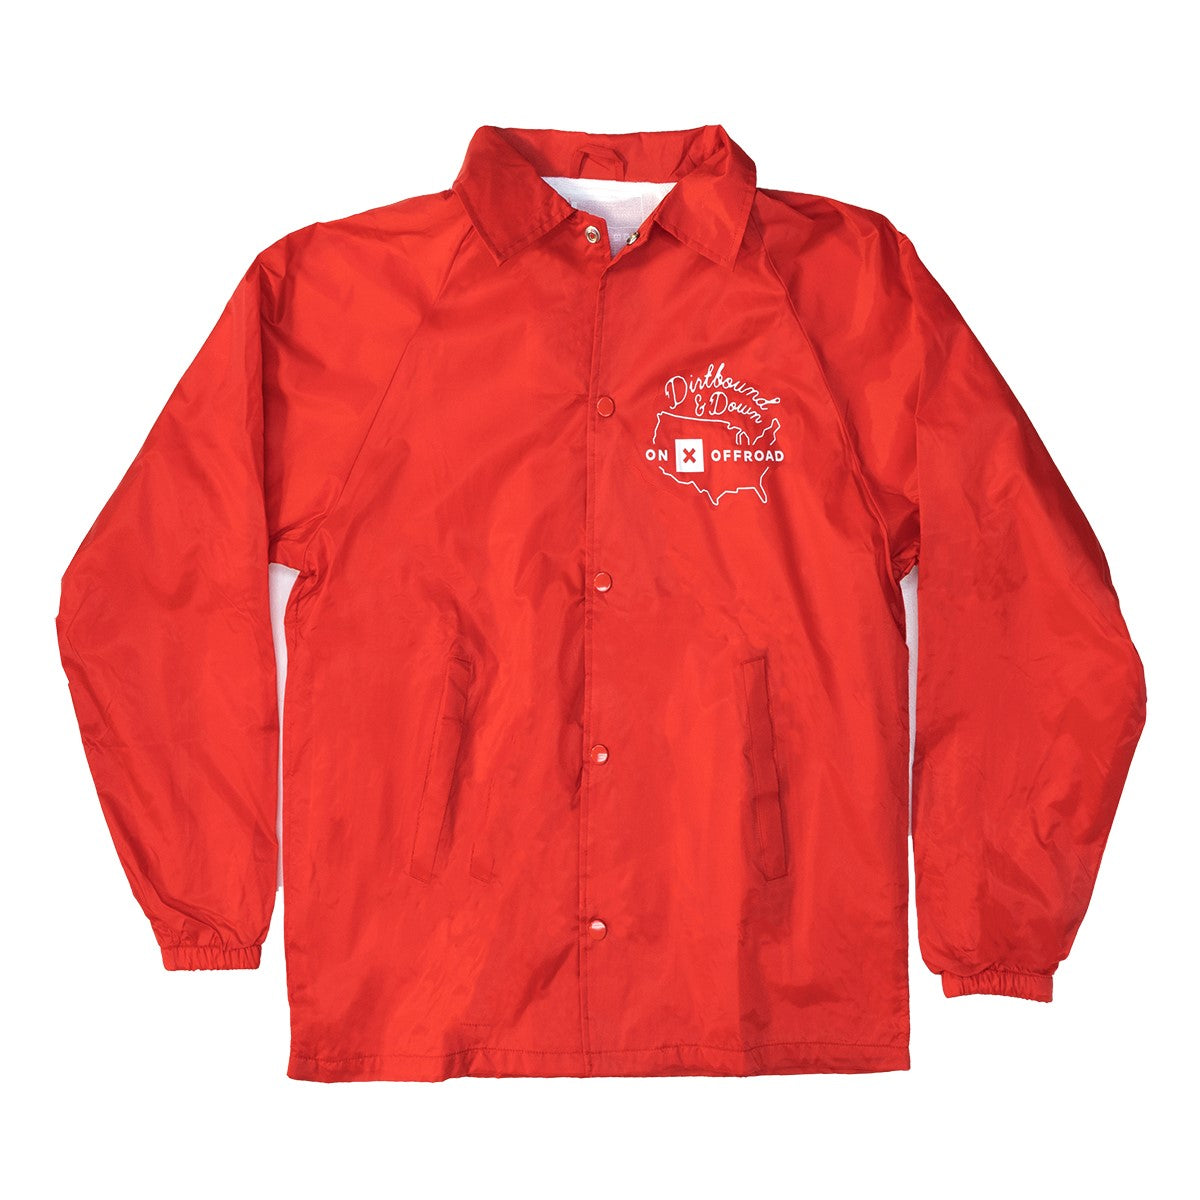 Offroad Dirtbound and Down Jacket | Red